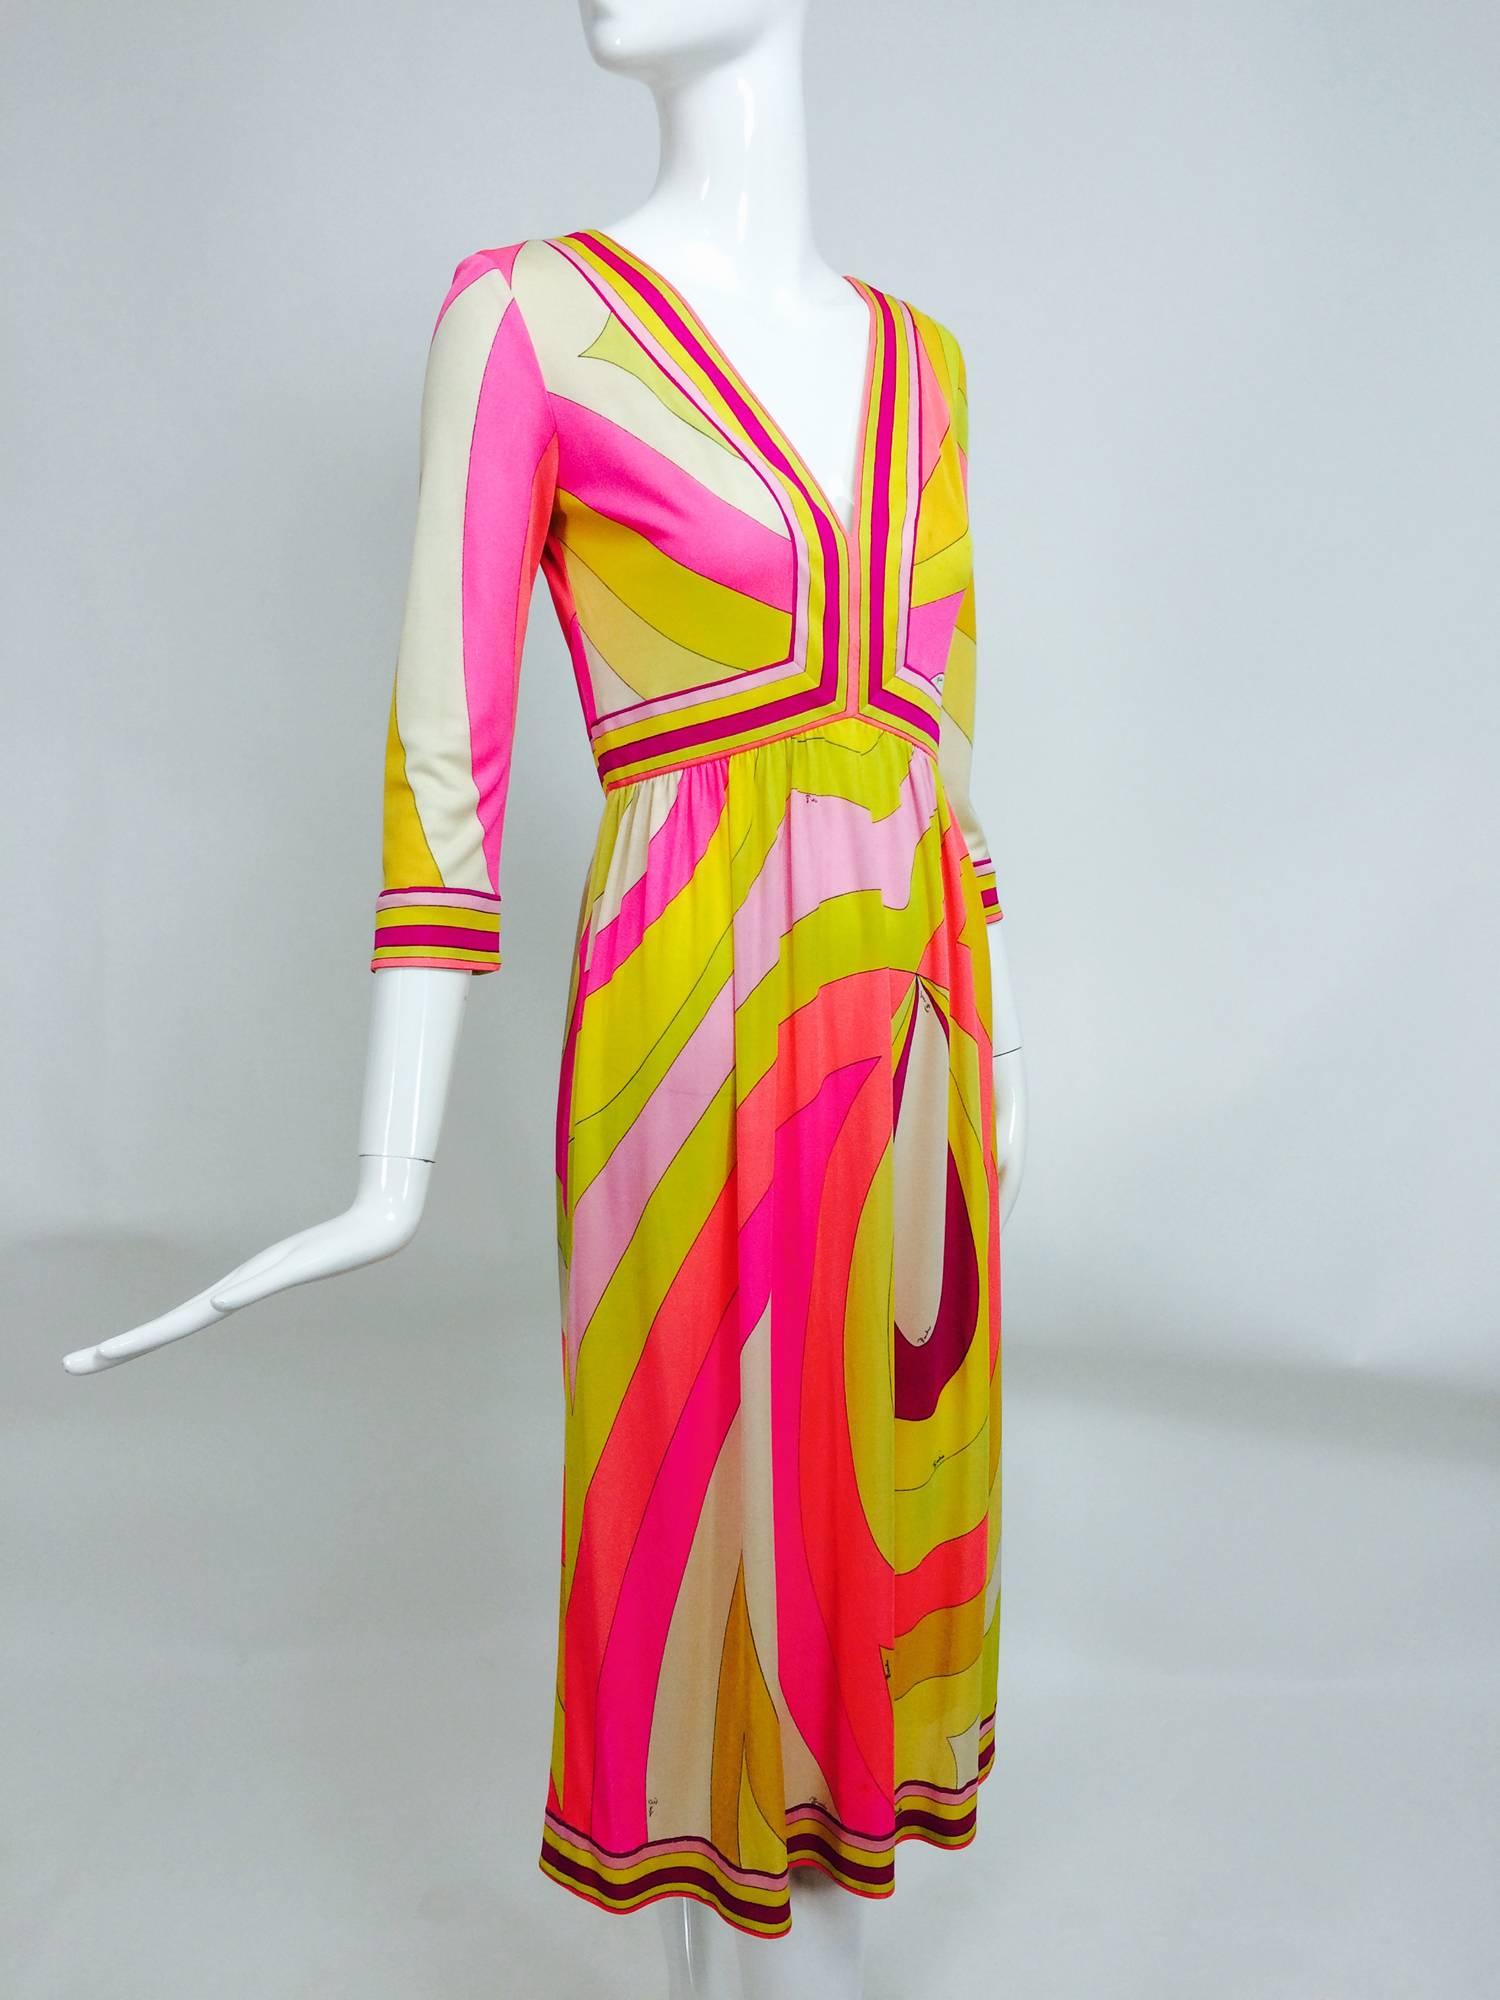 Vintage Emilio Pucci pink & citron Silk jersey dress 1960s...Amazing dress with brilliant colours and design, the best of what we all love about vintage pucci! Deep V neckline, 3/4 length sleeves, the bodice is fitted with a high waist and a